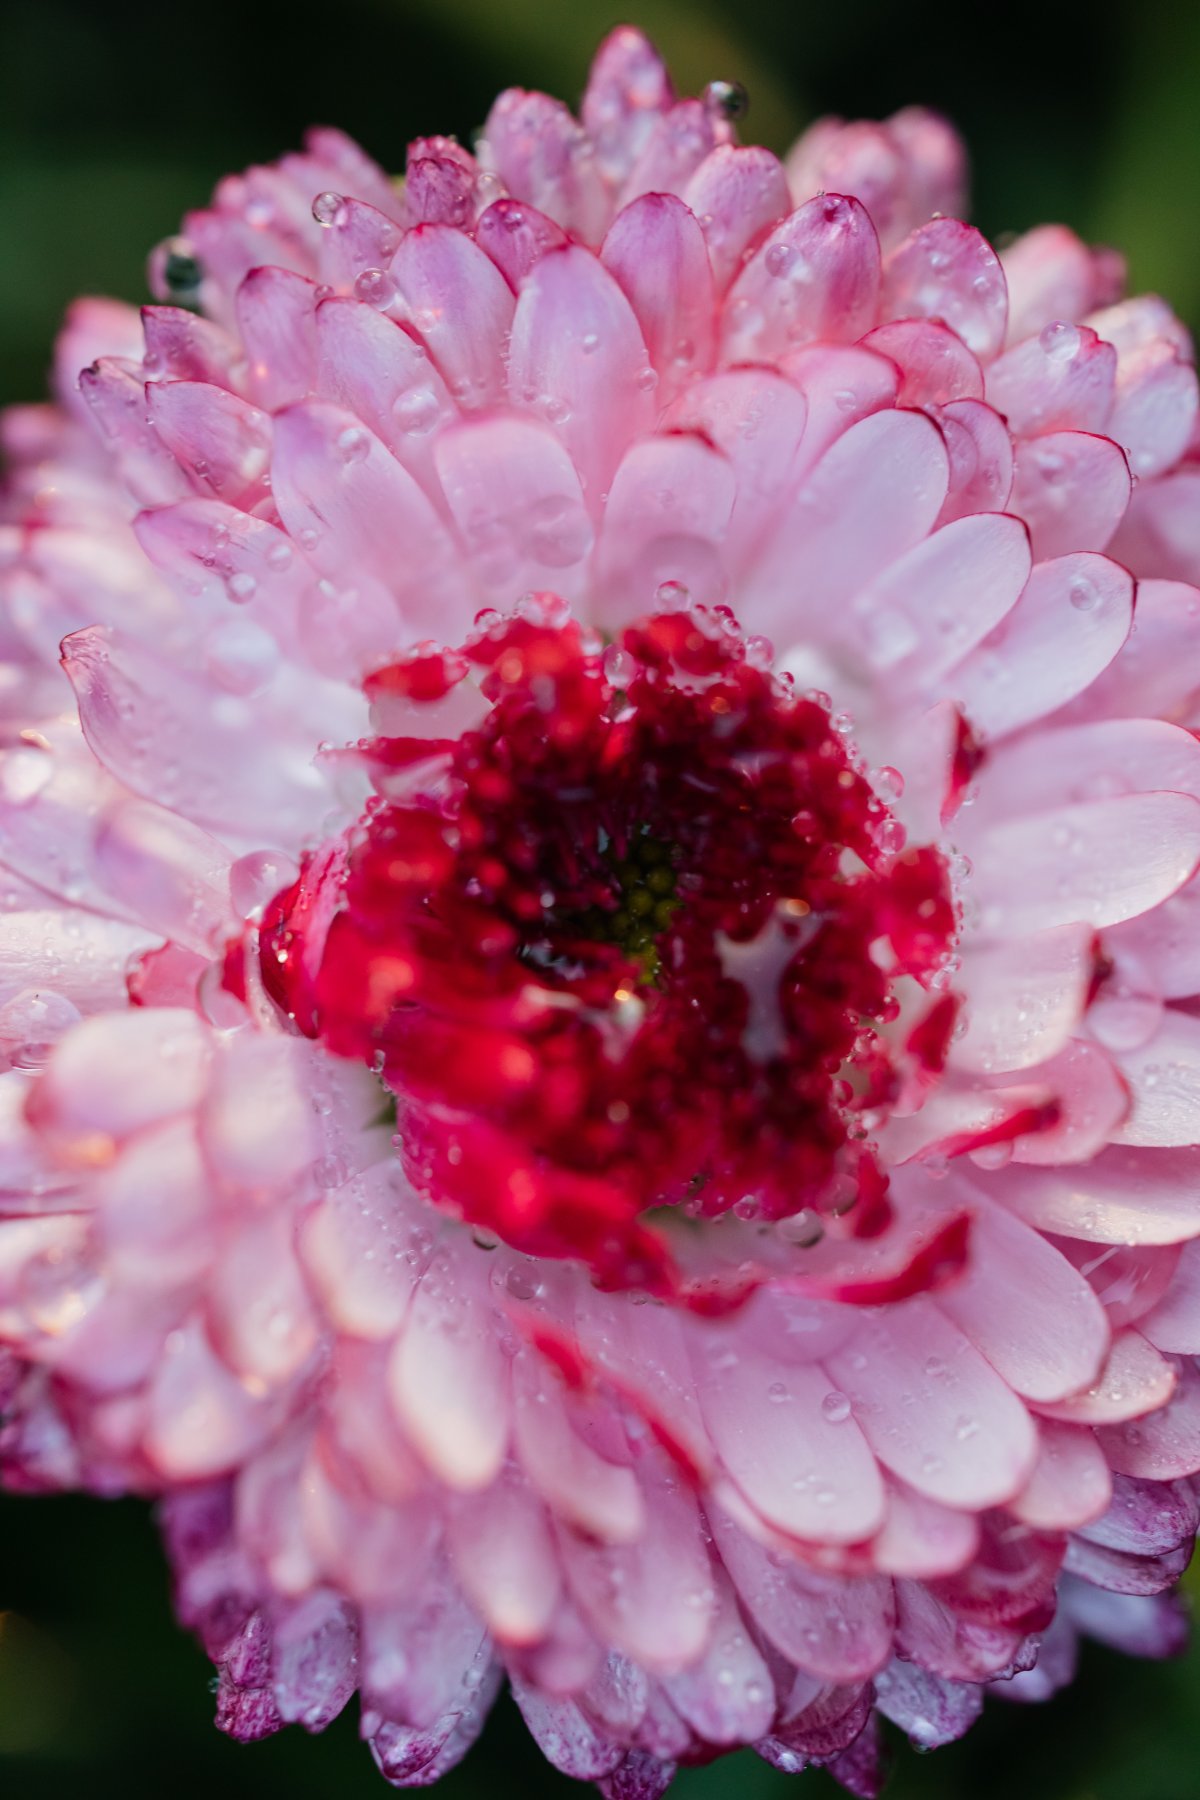 Pink petals and stamens pictures